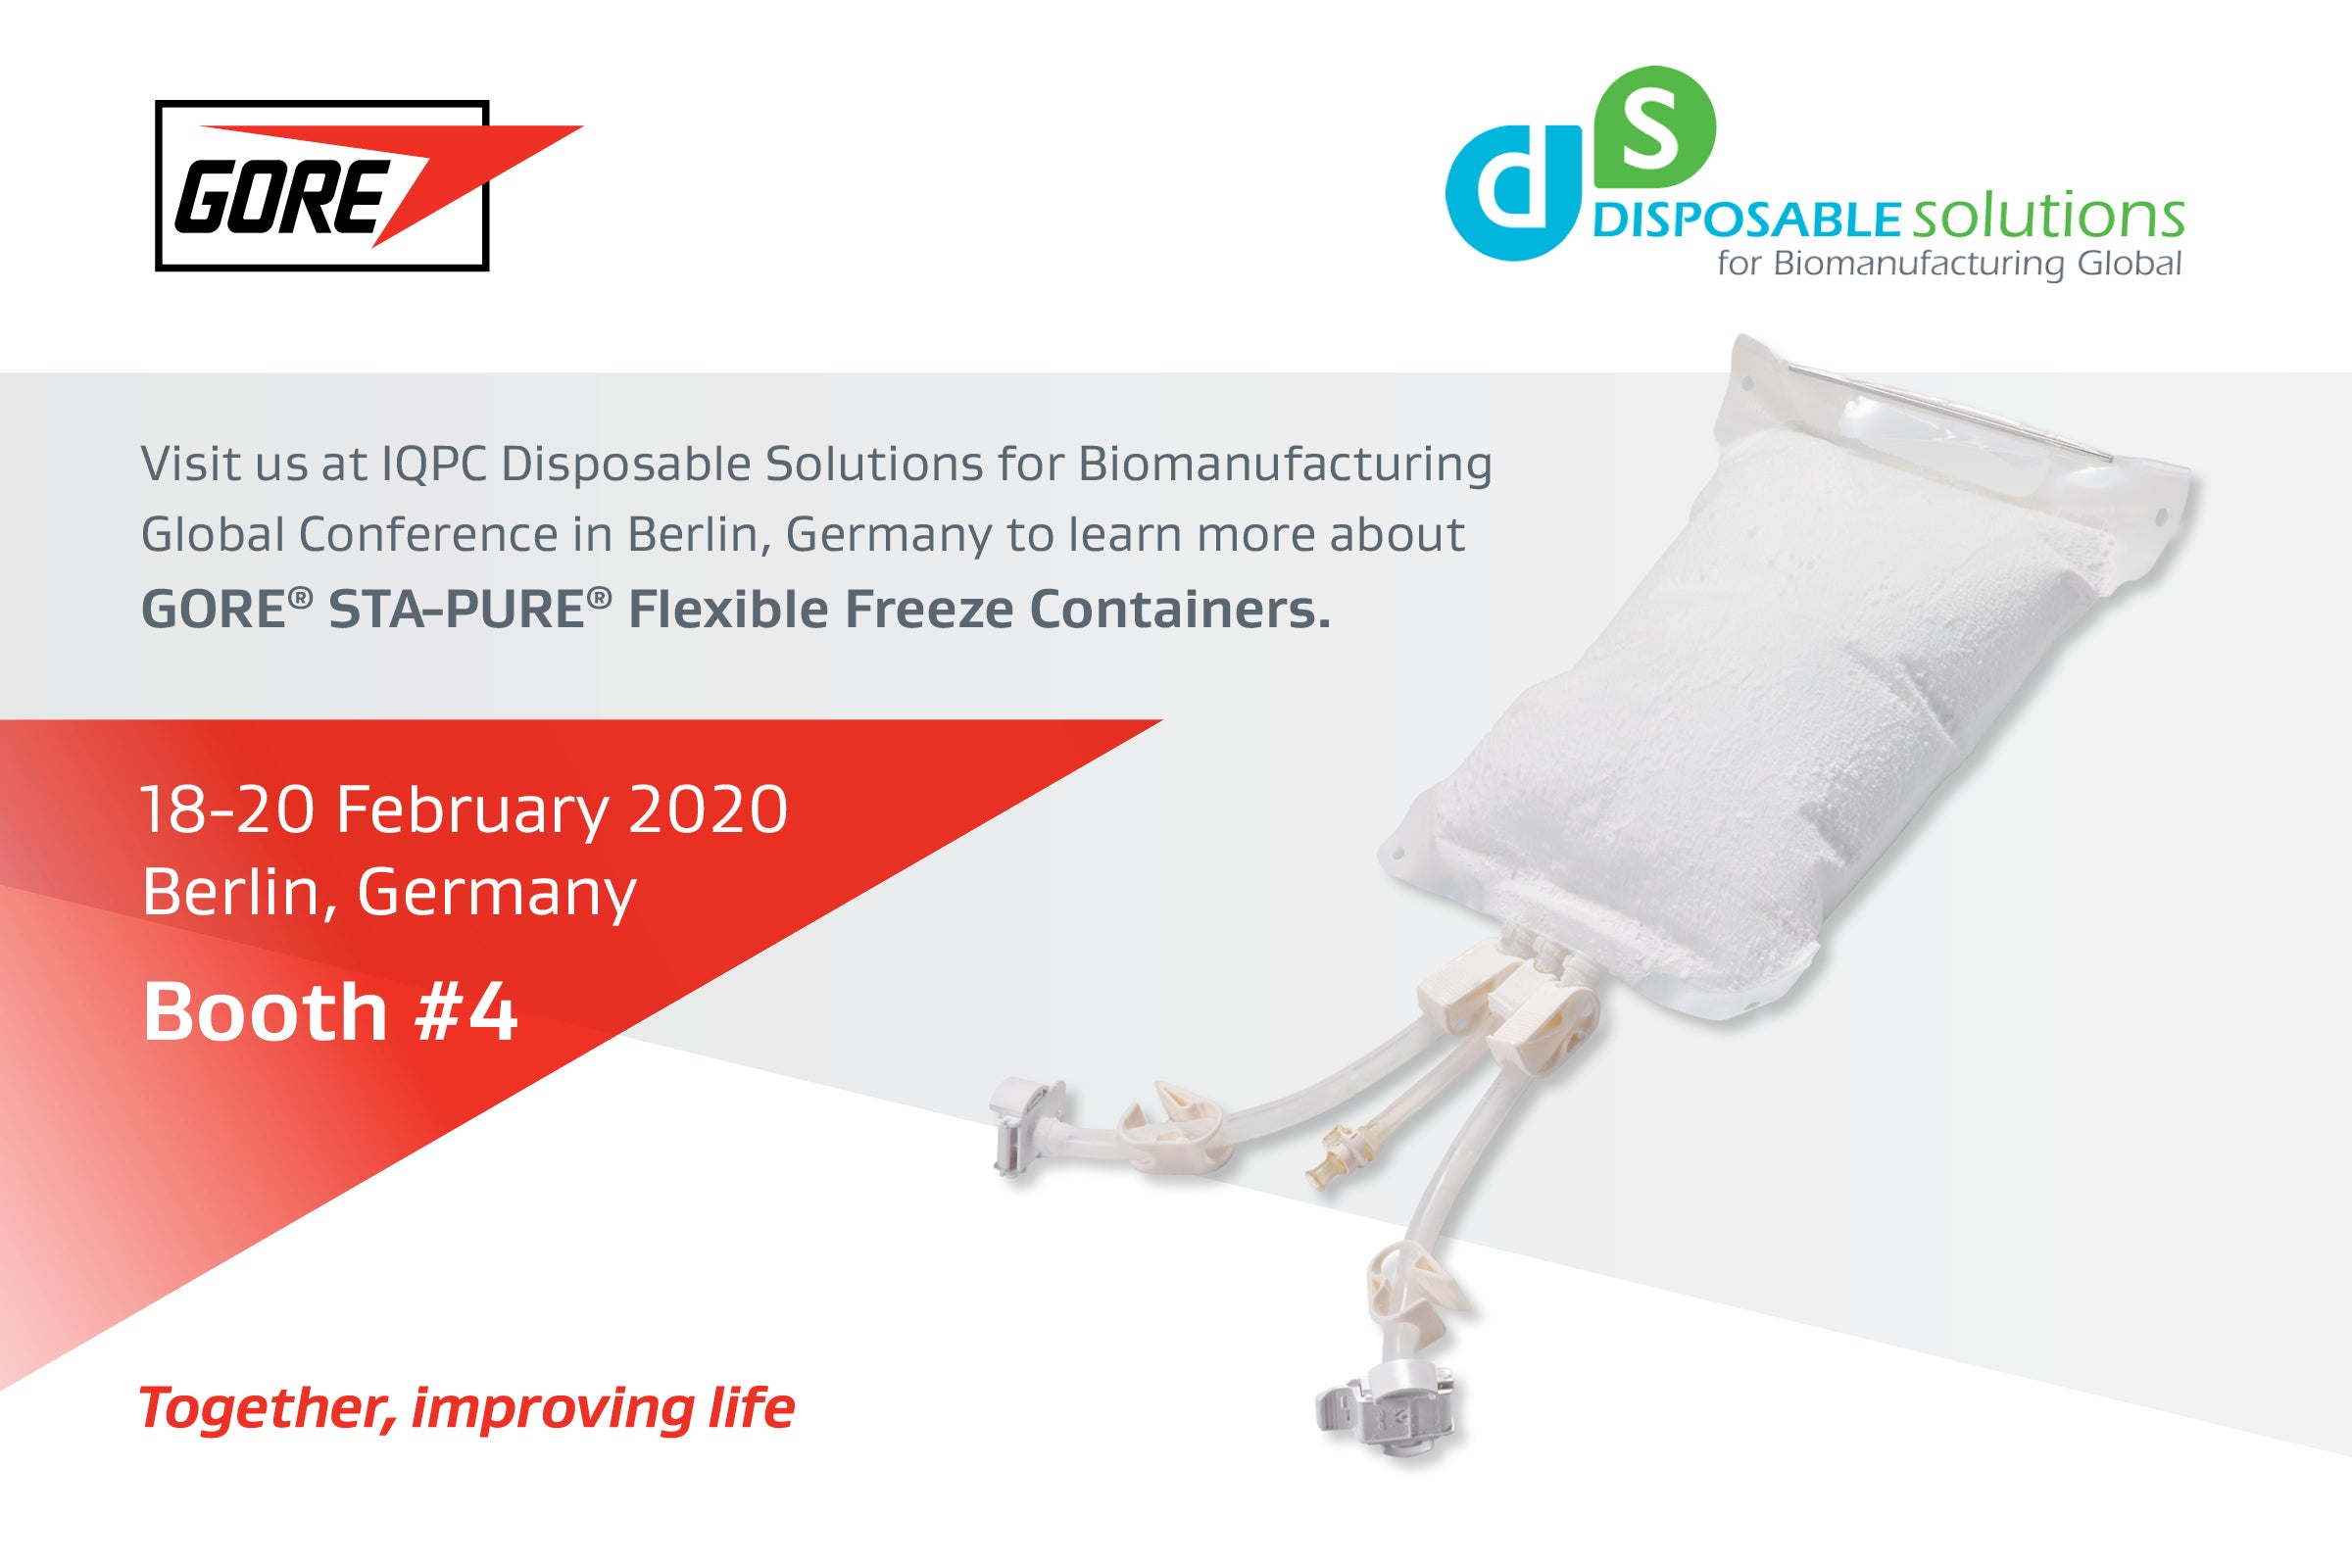 Visit us in booth #4 at IQPC Disposable Solutions for Biomanufacturing GLobal Conference in Berline Germany to learn more about GORE STA-PURE Flexible Feeeze Containers | 18-20 February 2020